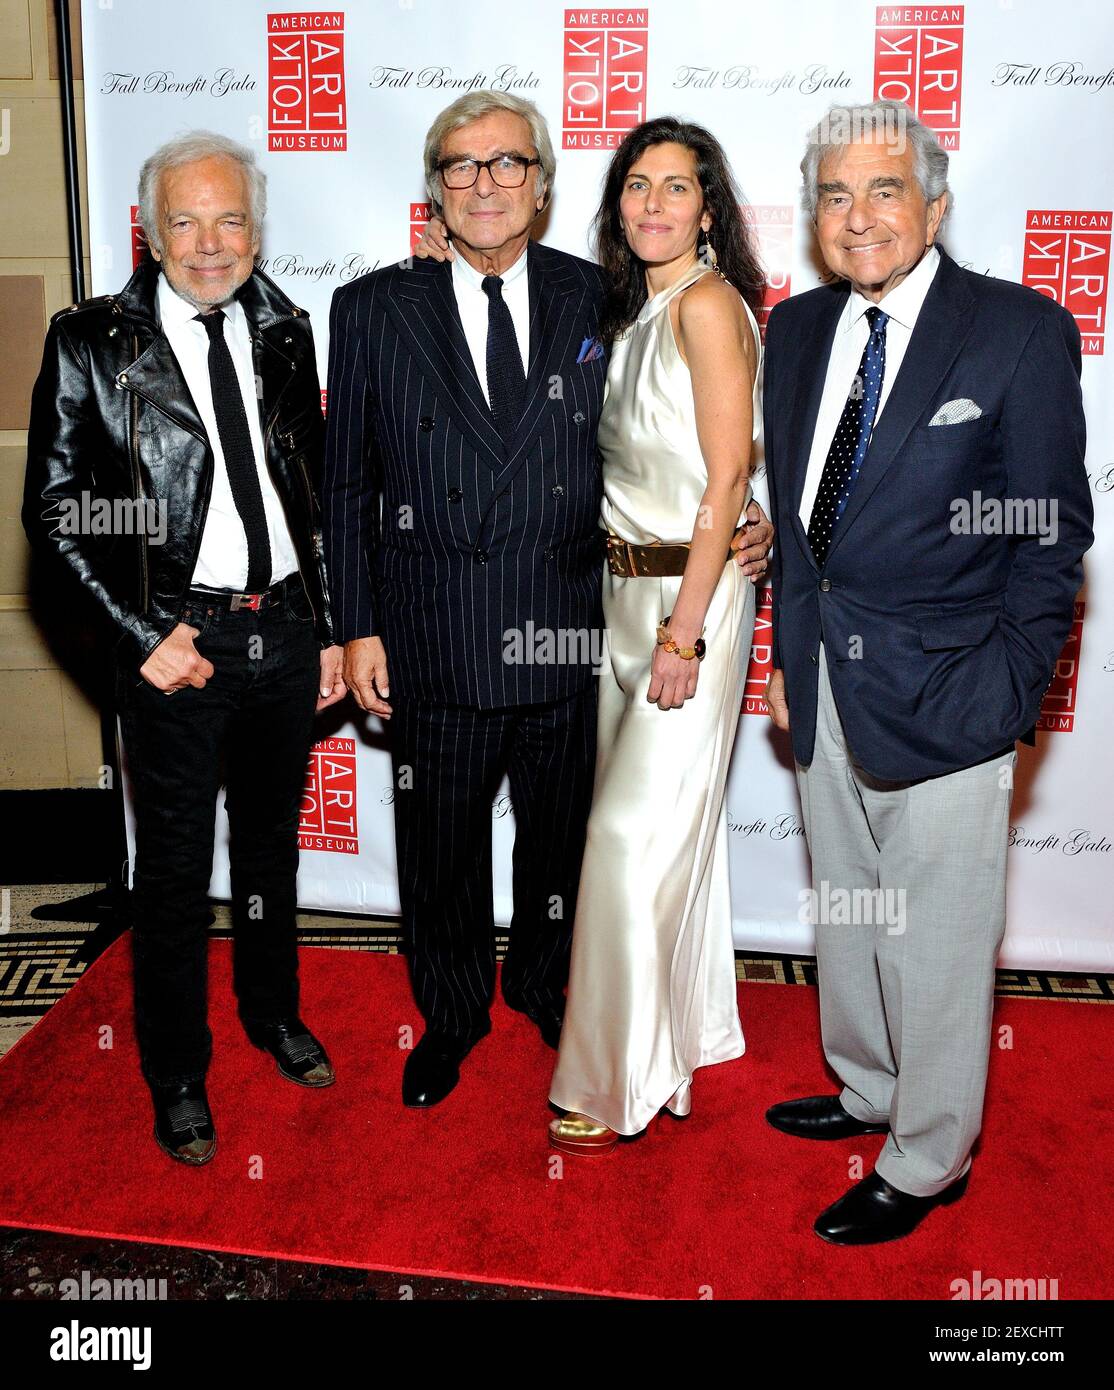 L-R: Ralph Lauren, Jerry Lauren, Jenny Lauren and Lenny Lauren attend The  American Folk Art Museum 2015 Fall Benefit Gala at Gotham Hall in New York,  NY on October 15, 2015. (Photo